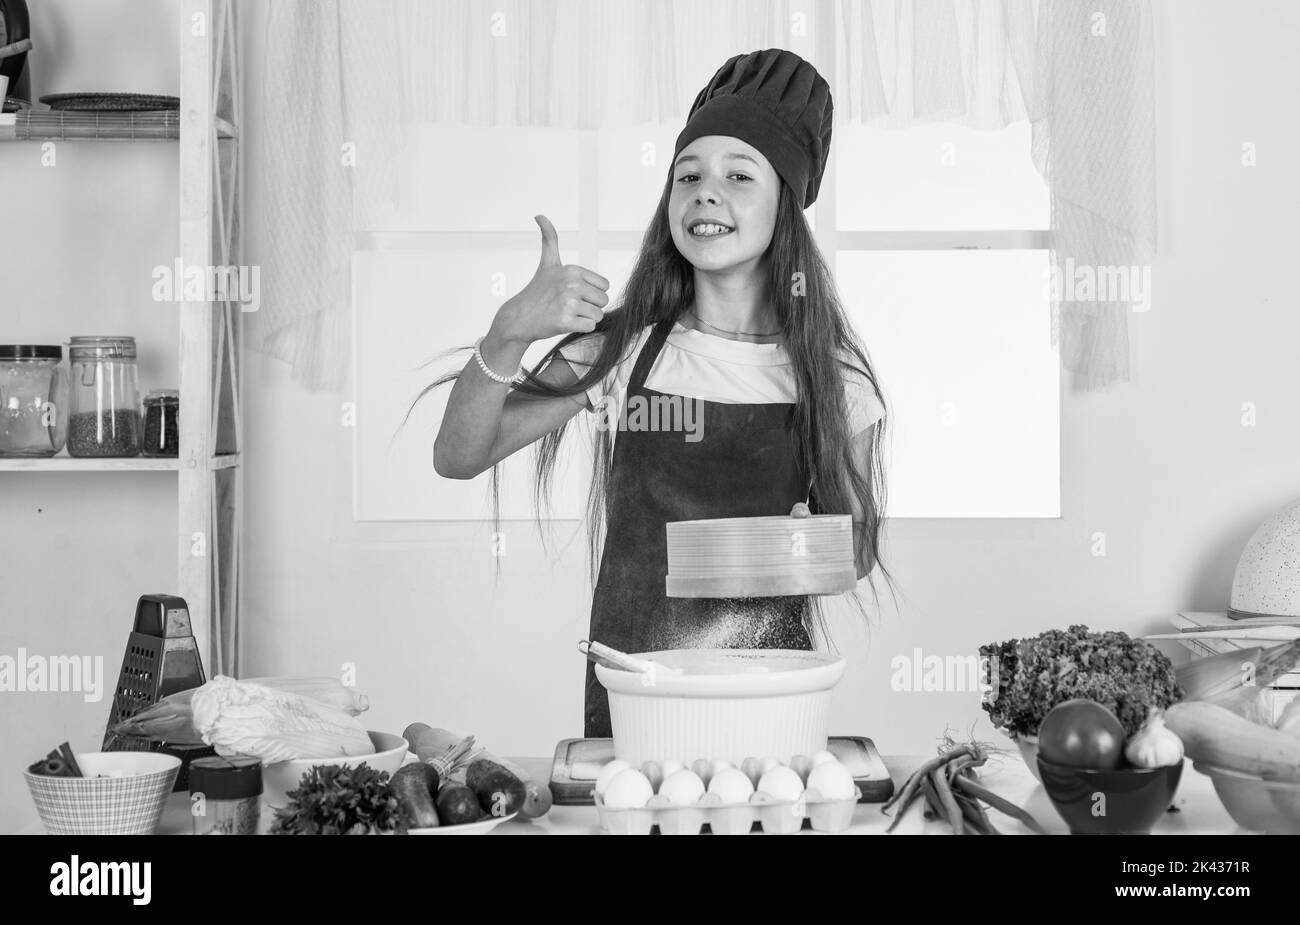 culinary and cuisine. happy childhood. happy child wear cook uniform. chef girl in hat and apron. kid cooking food in kitchen. choosing a career Stock Photo